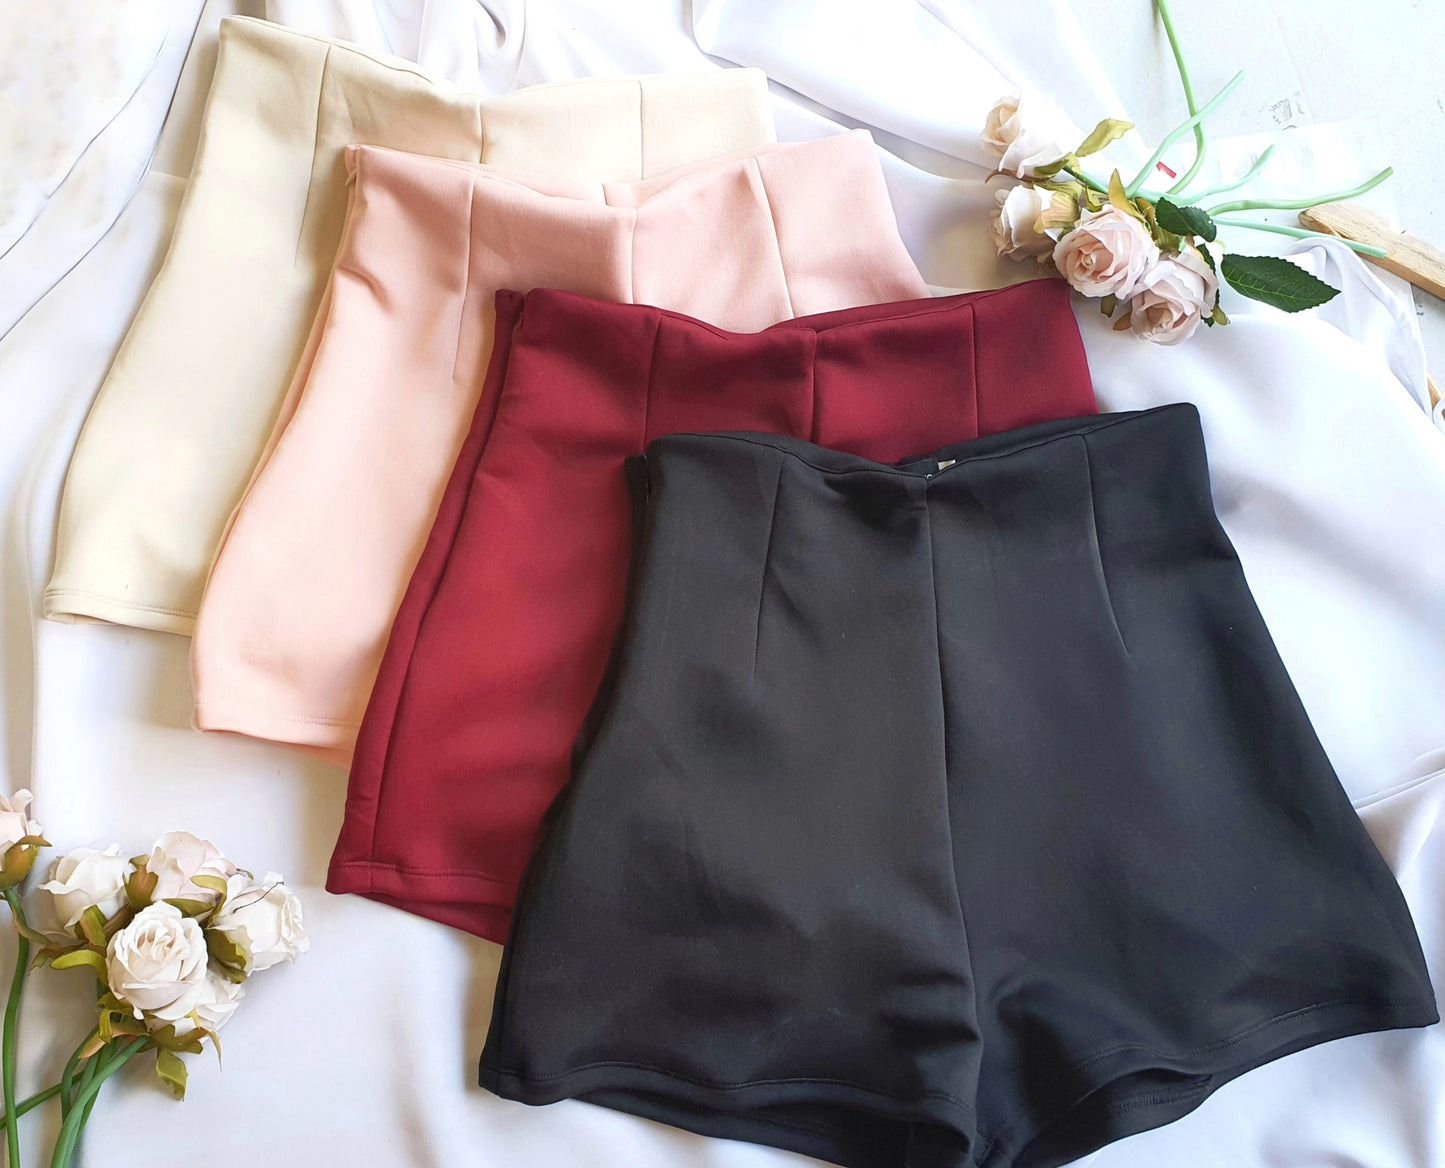 High-waisted Shorts in Dusty Pink